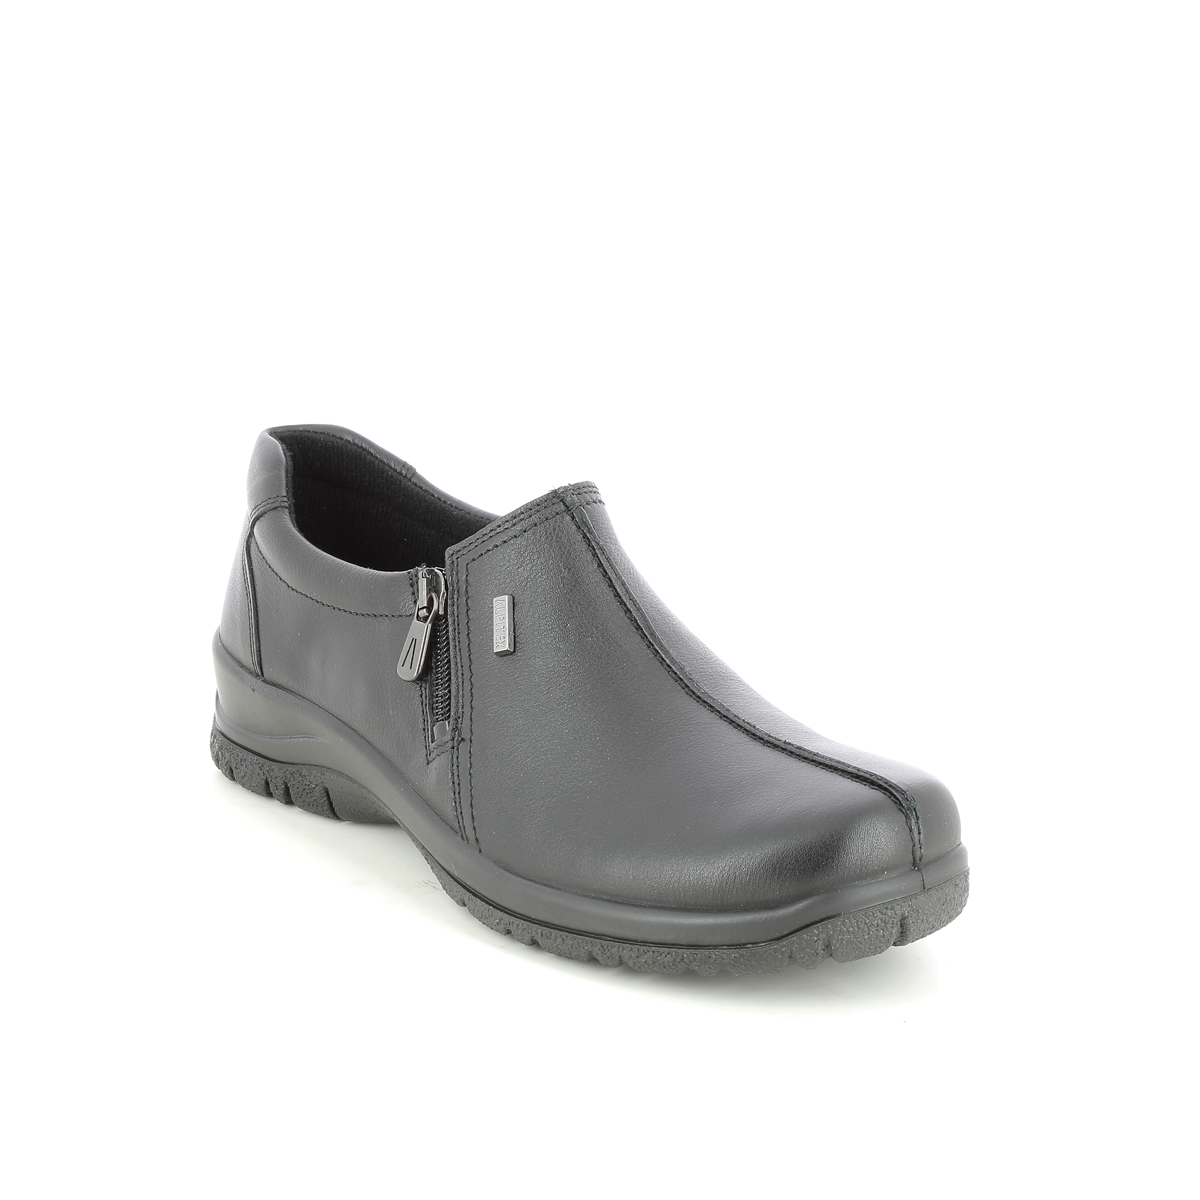 Ronyzip G 4237-2 Black leather Comfort Slip On Shoes